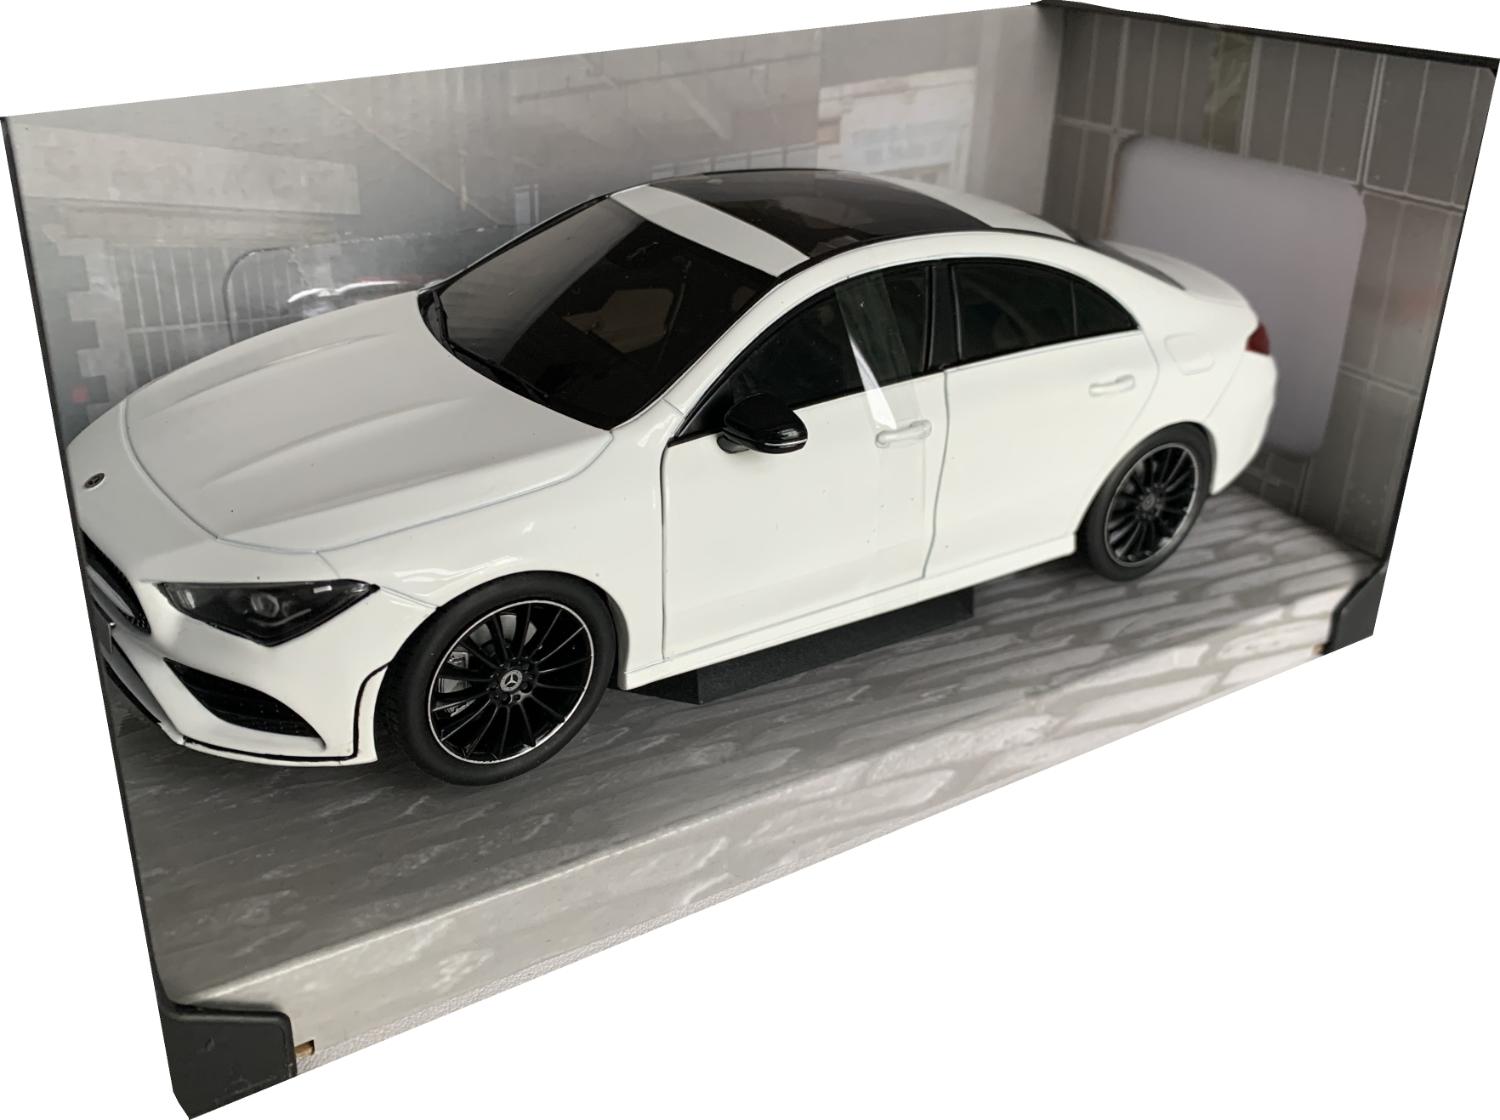 An excellent scale model of the Mercedes Benz CLA C118 Coupe AMG Line with high level of detail throughout, all authentically recreated.